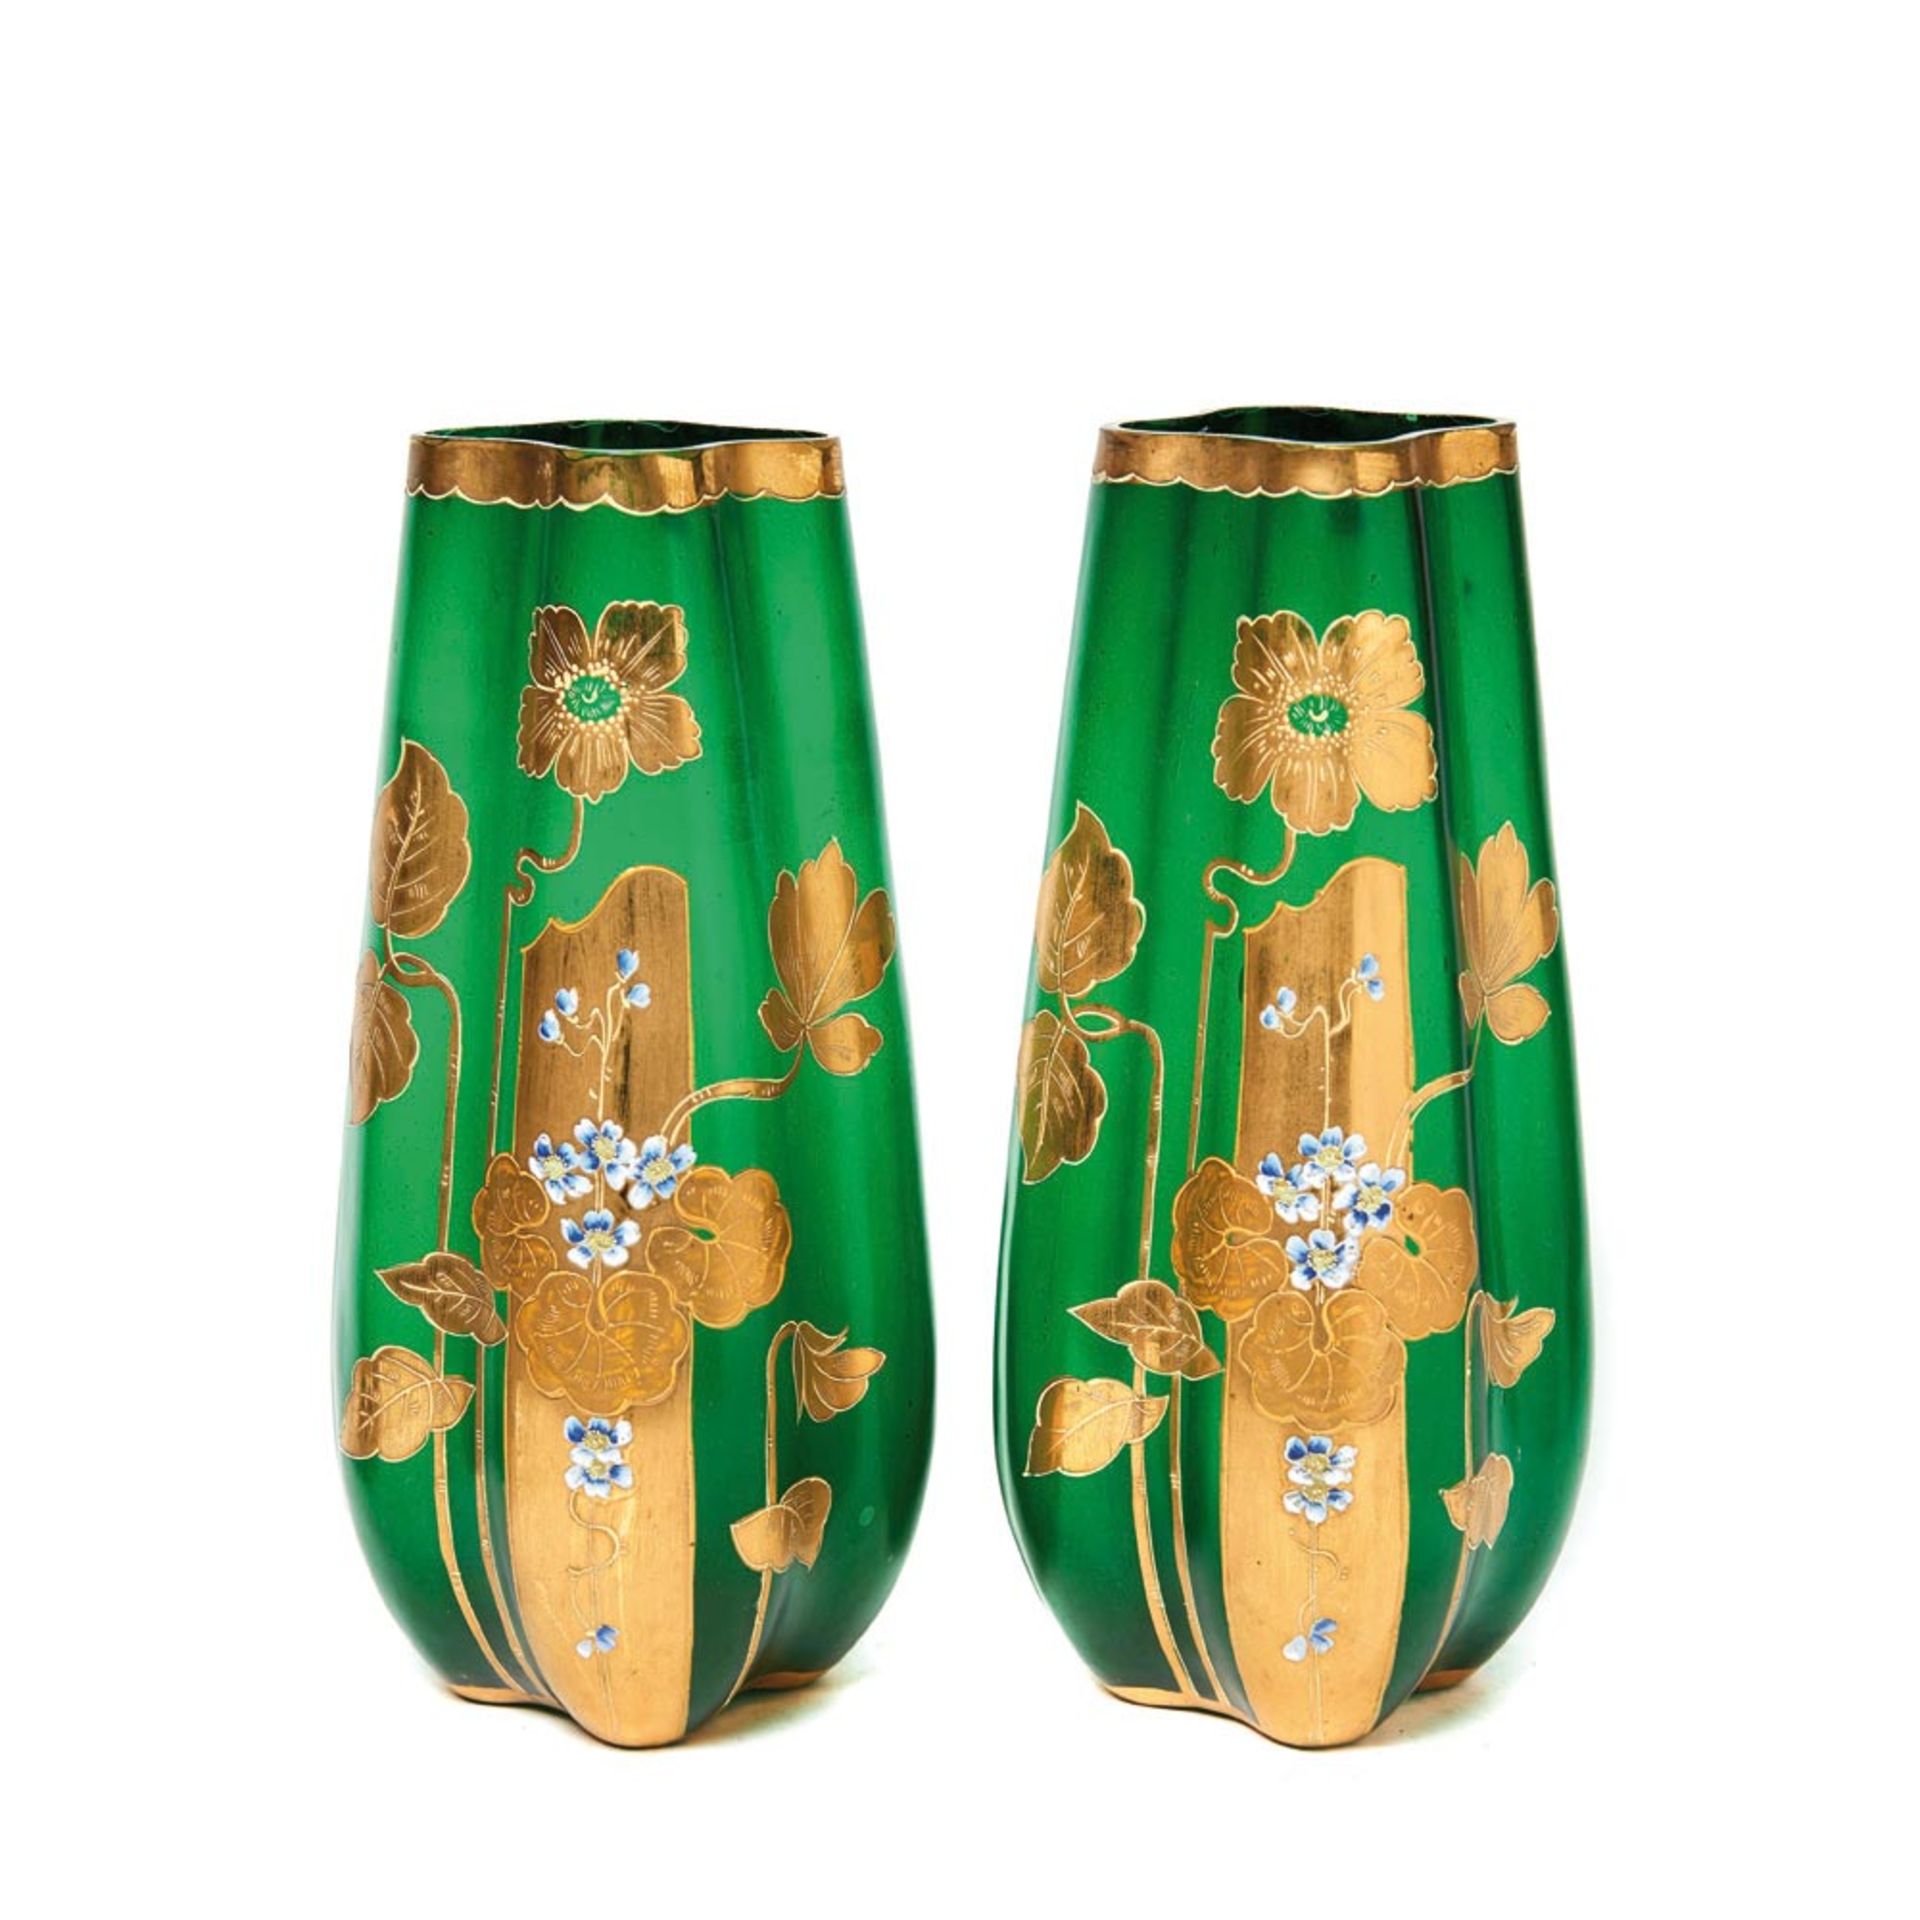 Modernist enamelled glass pair of vases, early 20th century